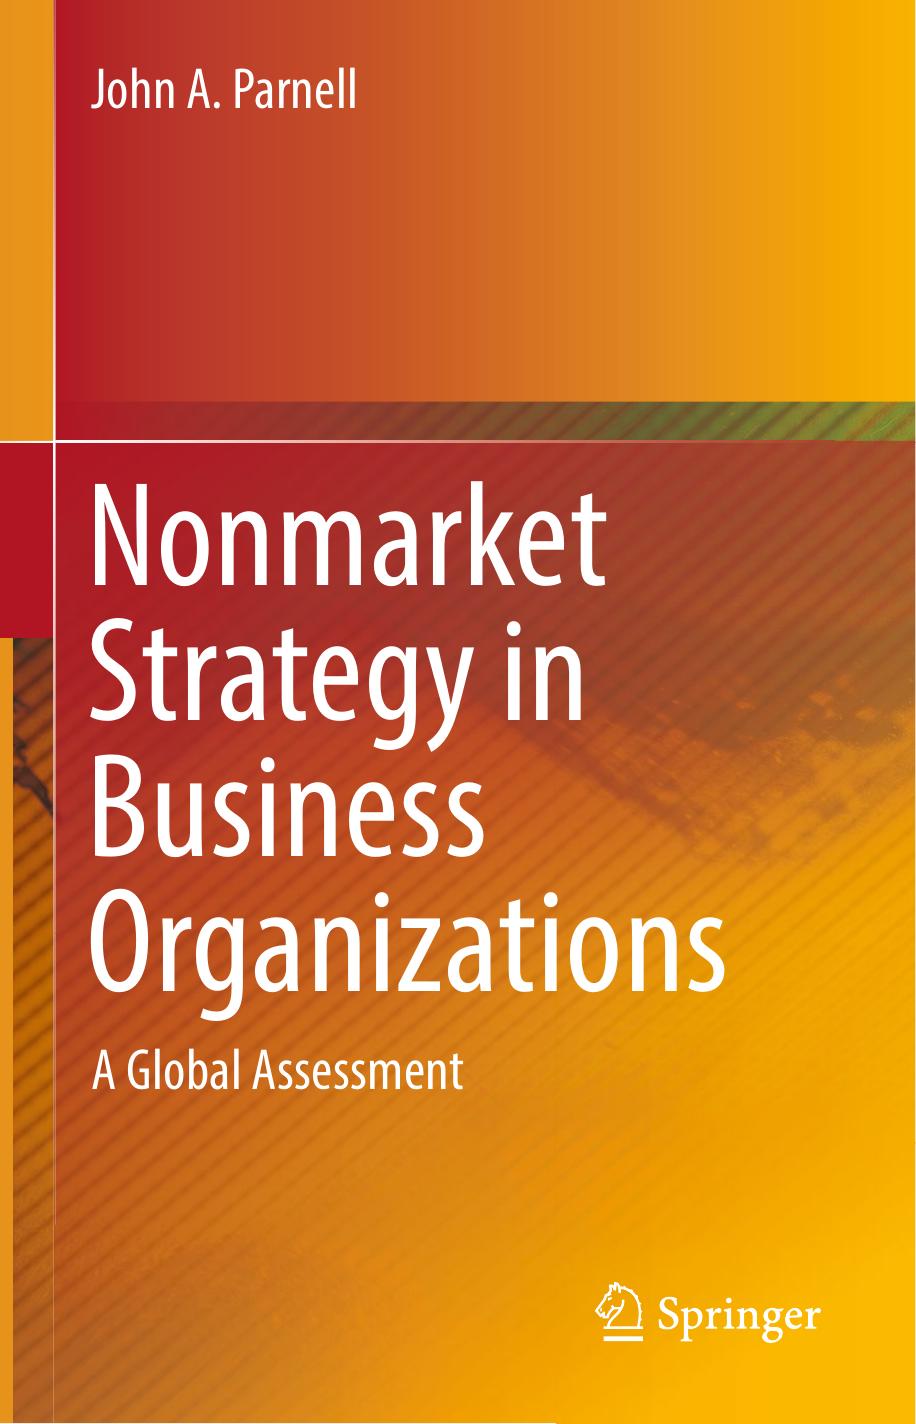 Nonmarket Strategy in Business Organizations by John A. Parnell